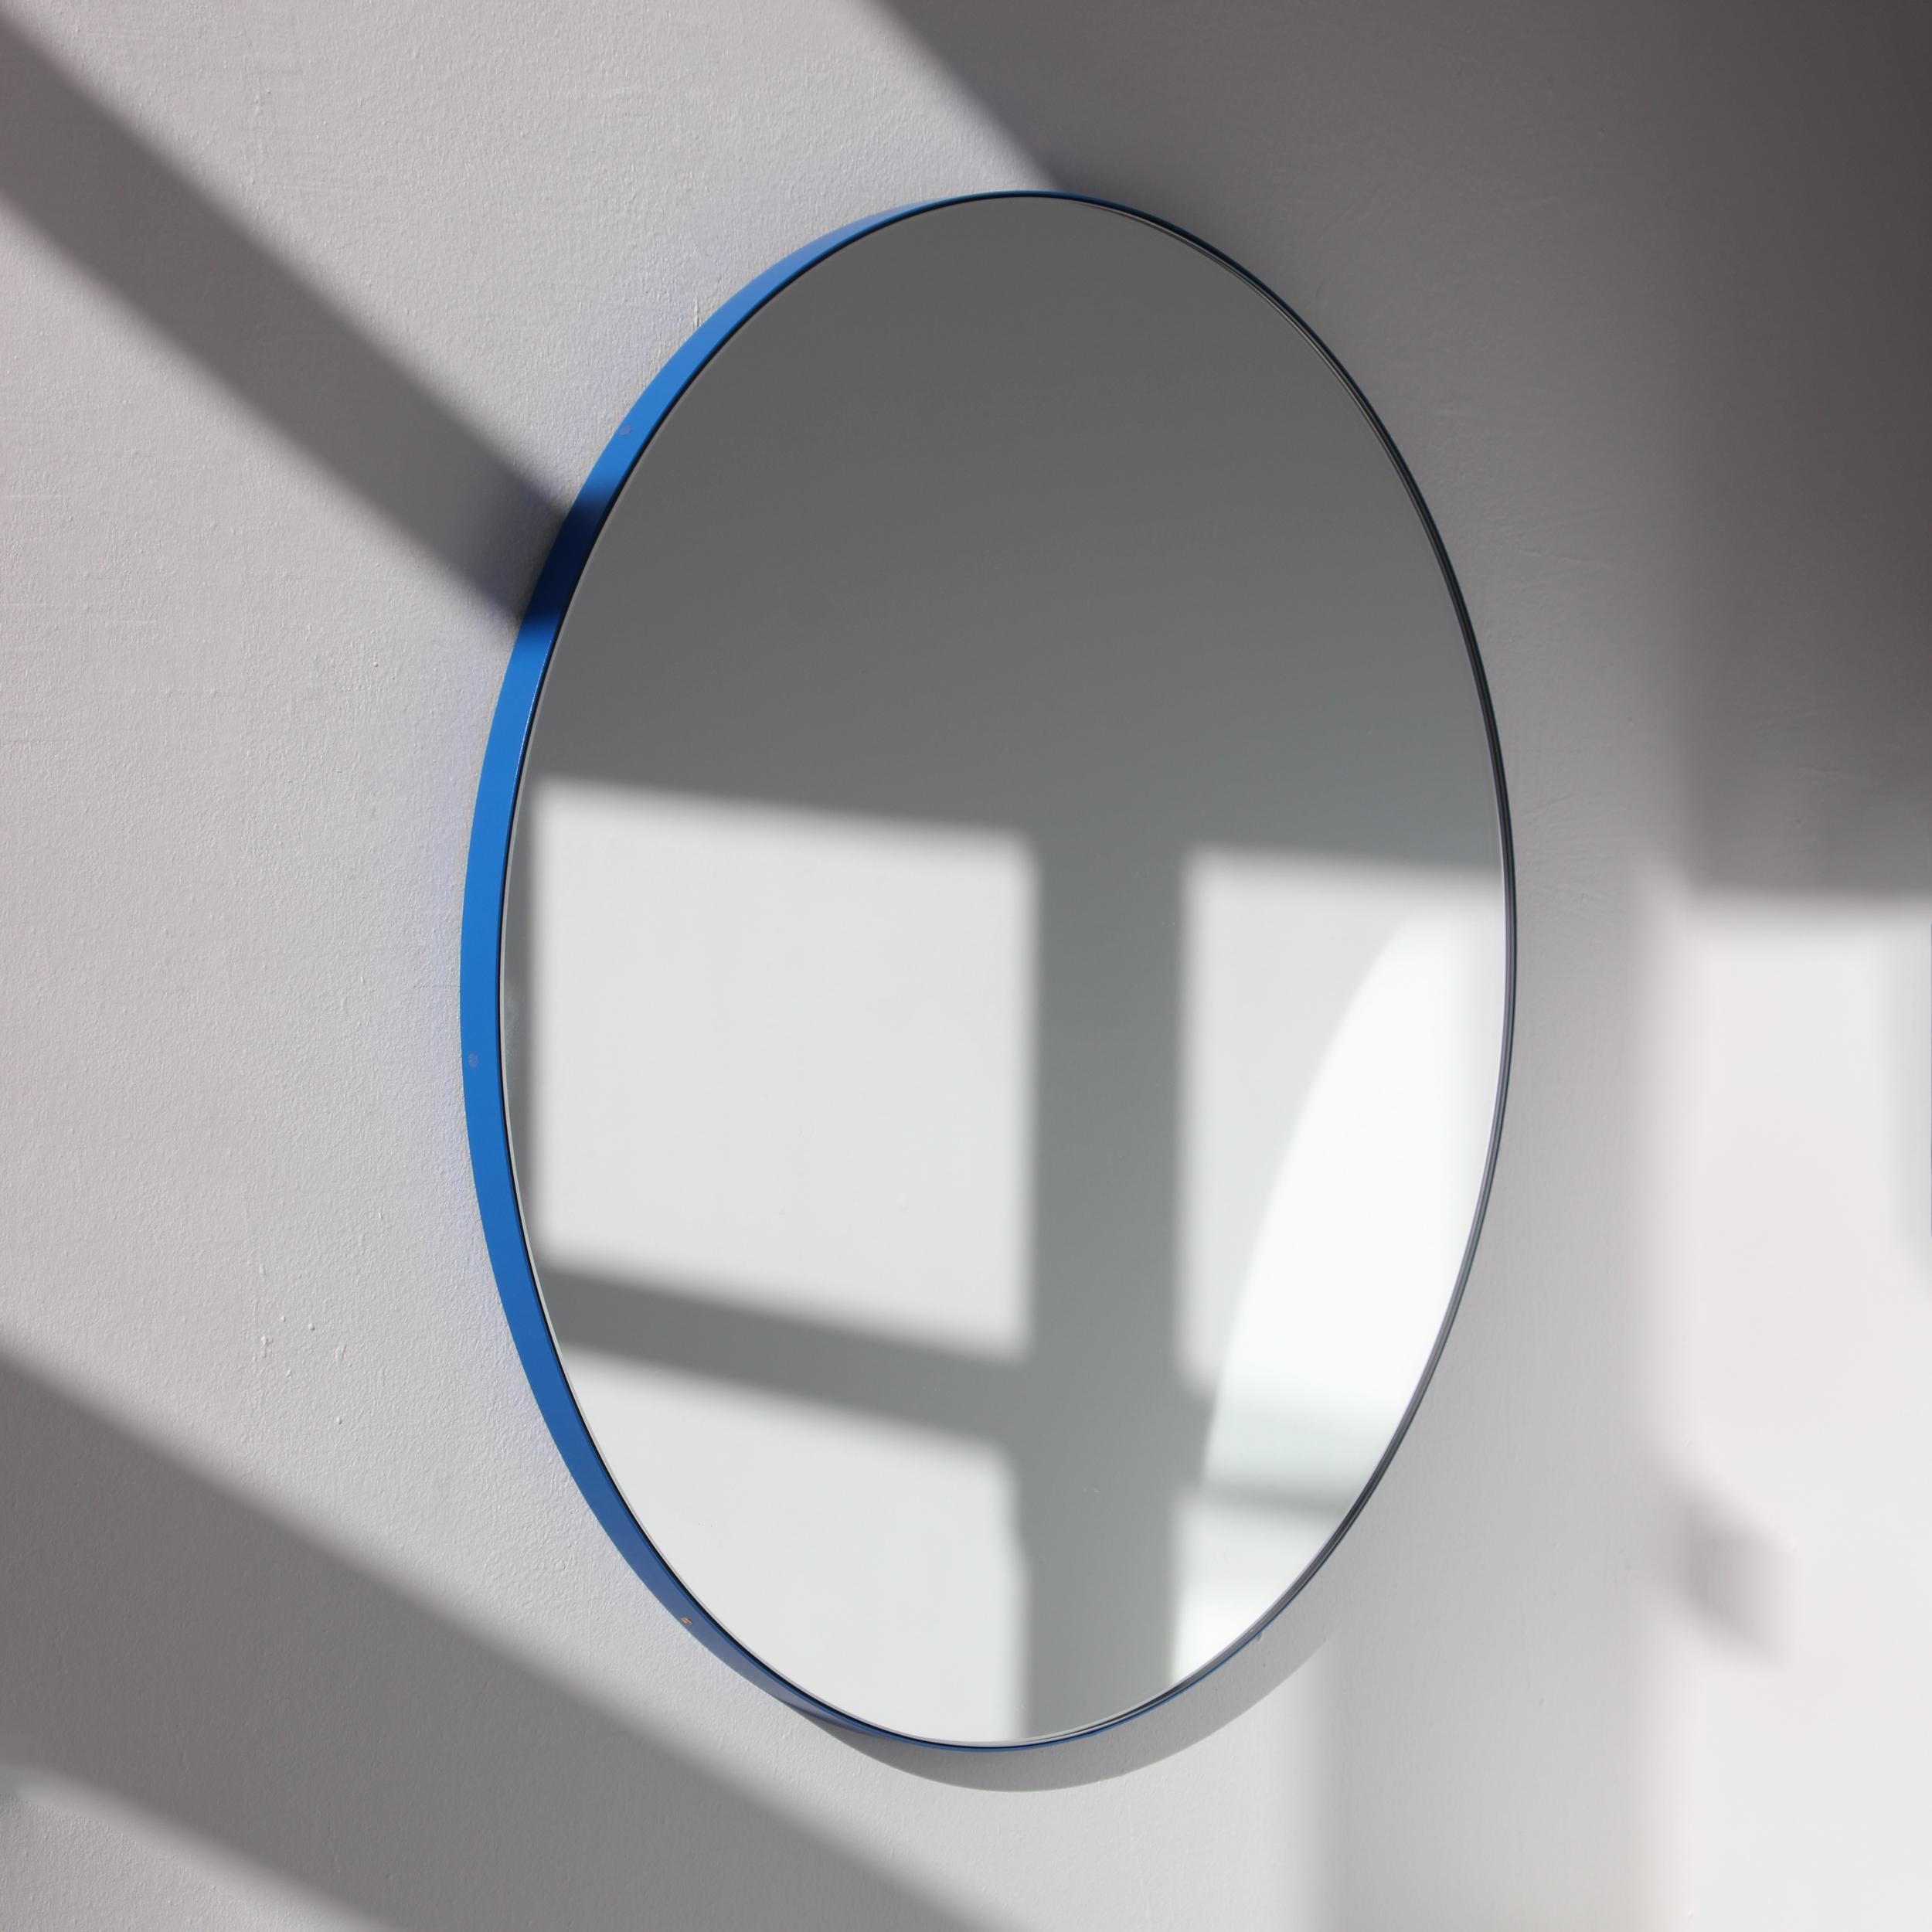 Minimalist round mirror with a modern aluminium powder coated blue frame. Designed and handcrafted in London, UK.

Medium, large and extra-large mirrors (60, 80 and 100cm) are fitted with an ingenious French cleat (split batten) system so they may